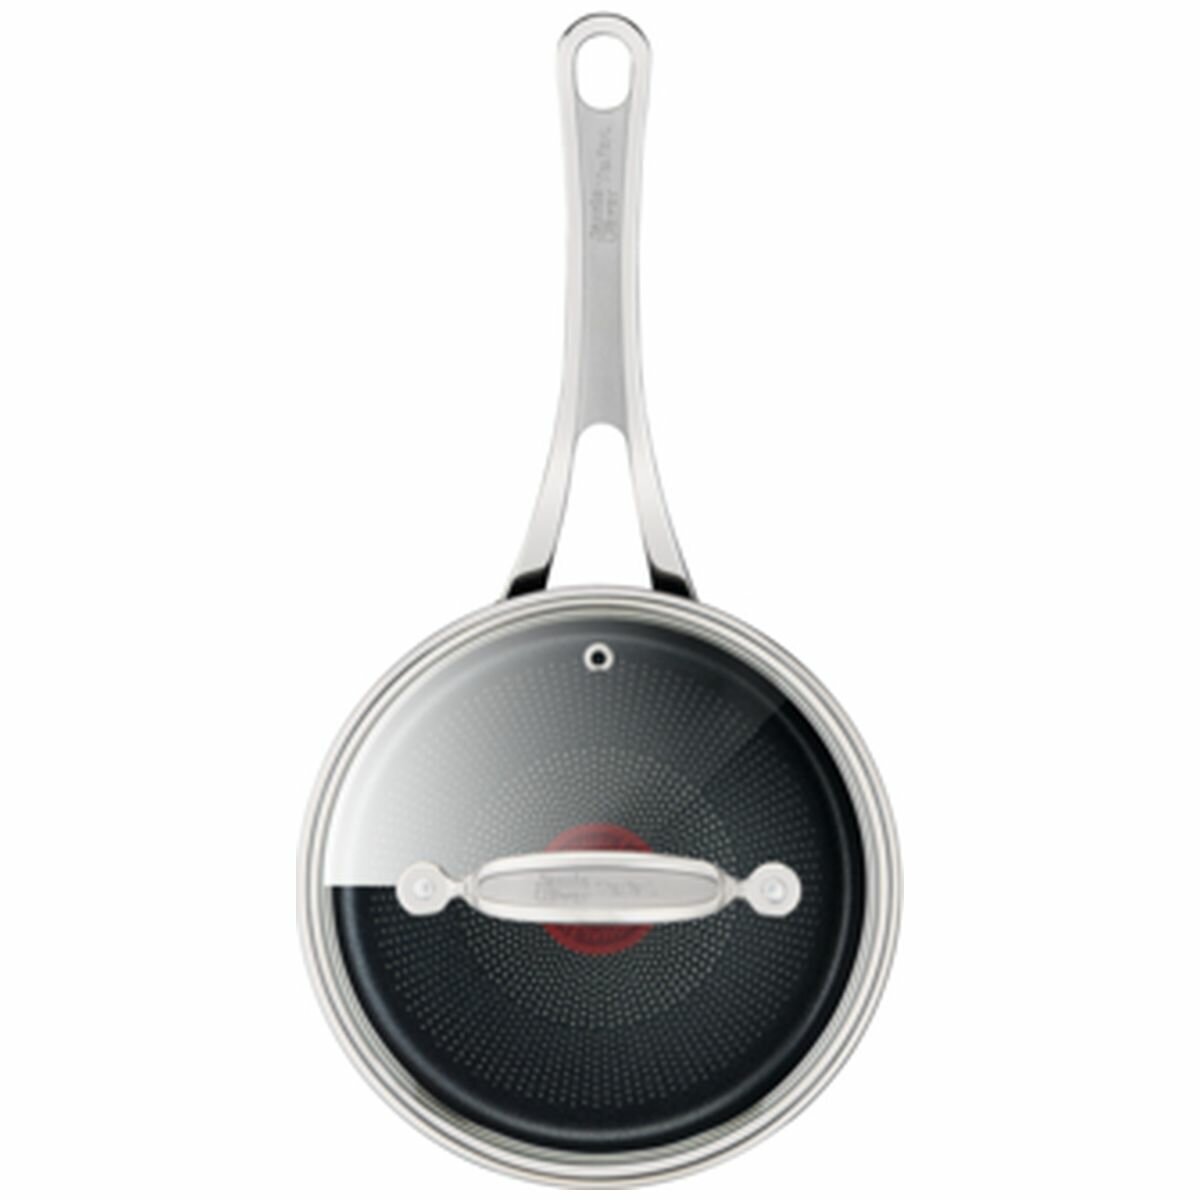 https://www.winnings.com.au/ak/6/1/1/3/61131ac25575d0625e63939e5ee66d64b4ea0f42_tefal_jamie_oliver_cooks_classics_induction_non_stick_hard_anodised_5_piece_cookware_set_h912s5-high.jpeg